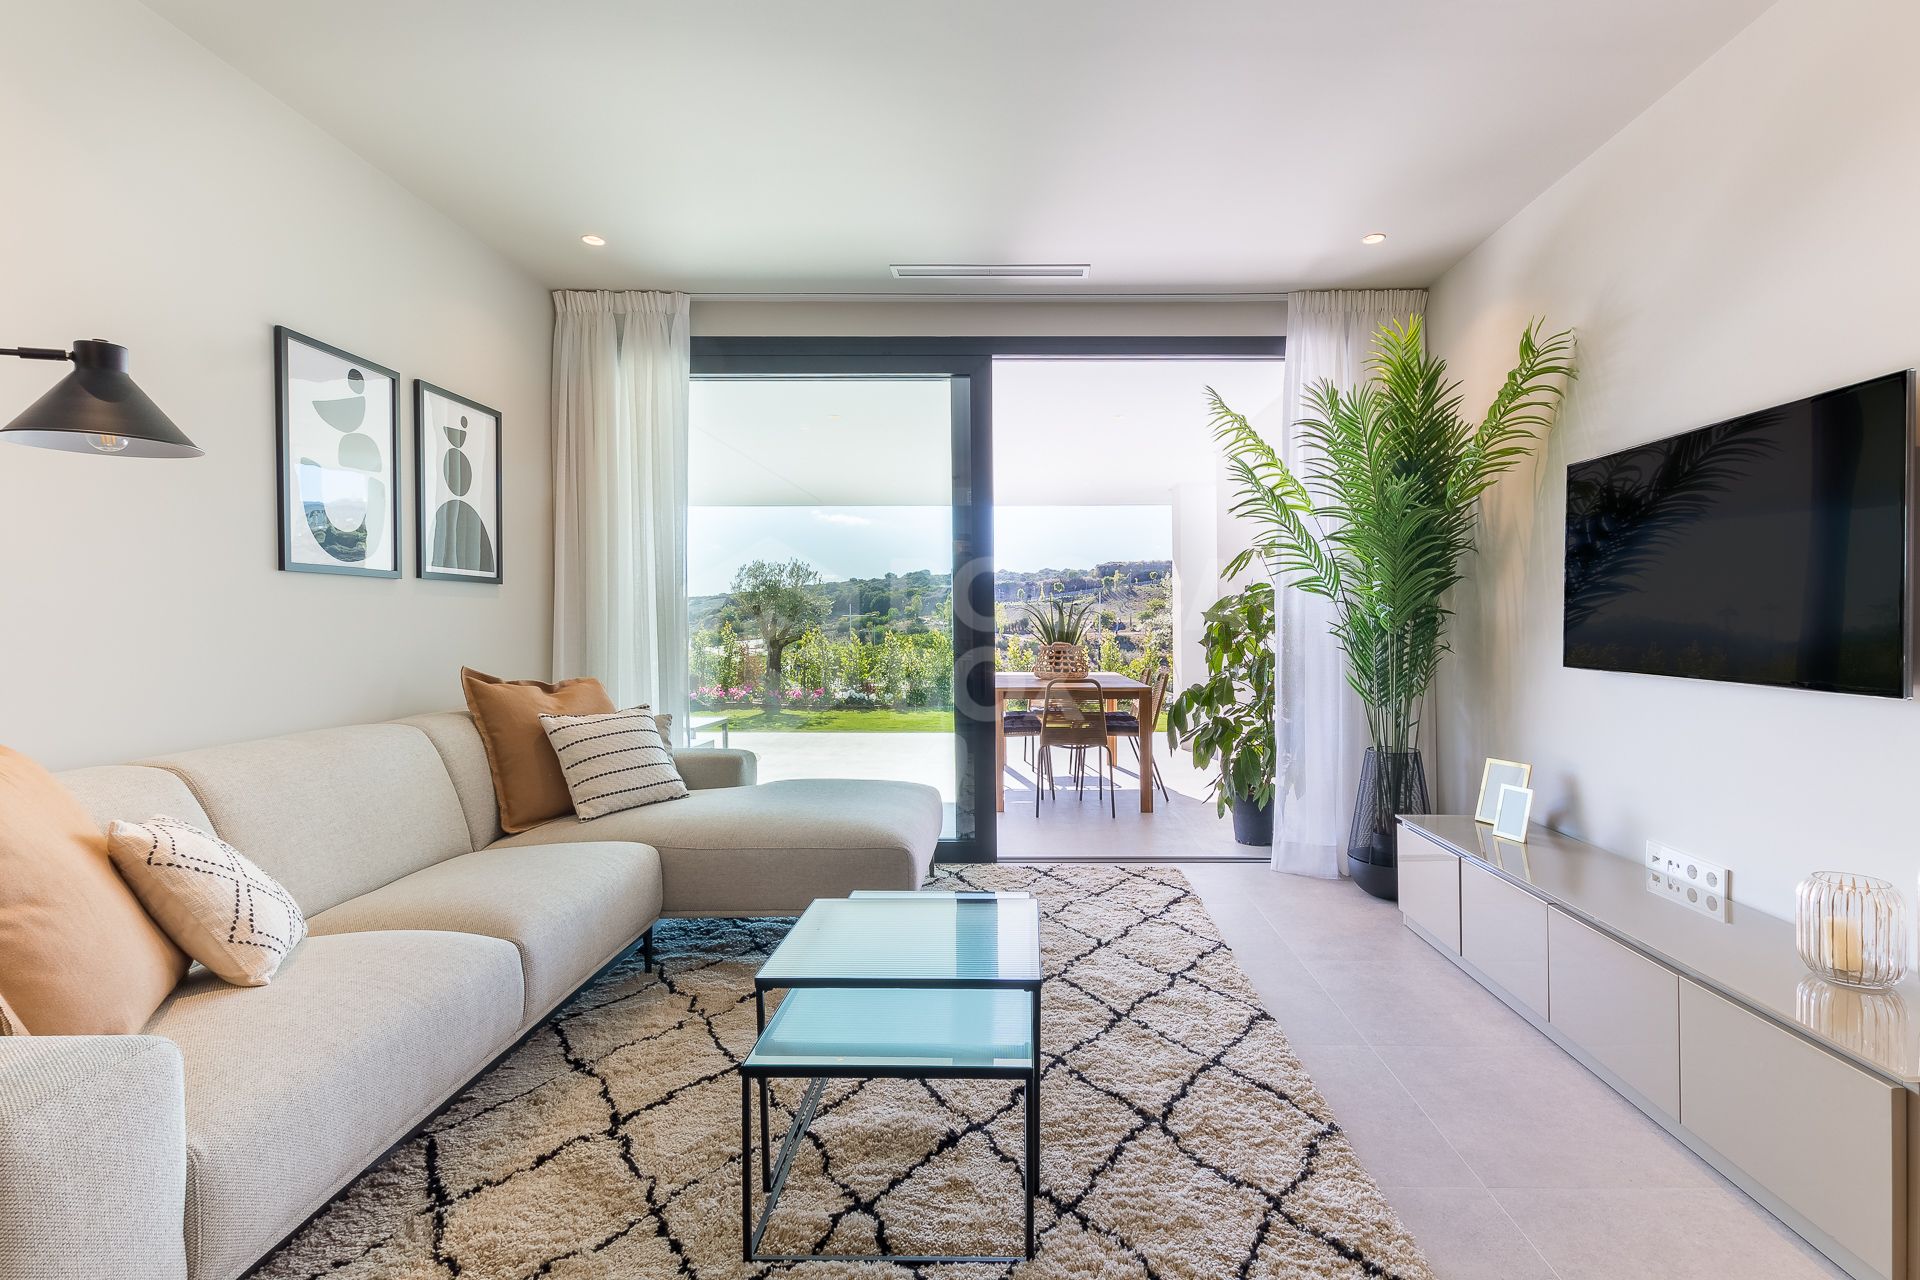 Introducing a Contemporary Haven: Your Dream Home Awaits